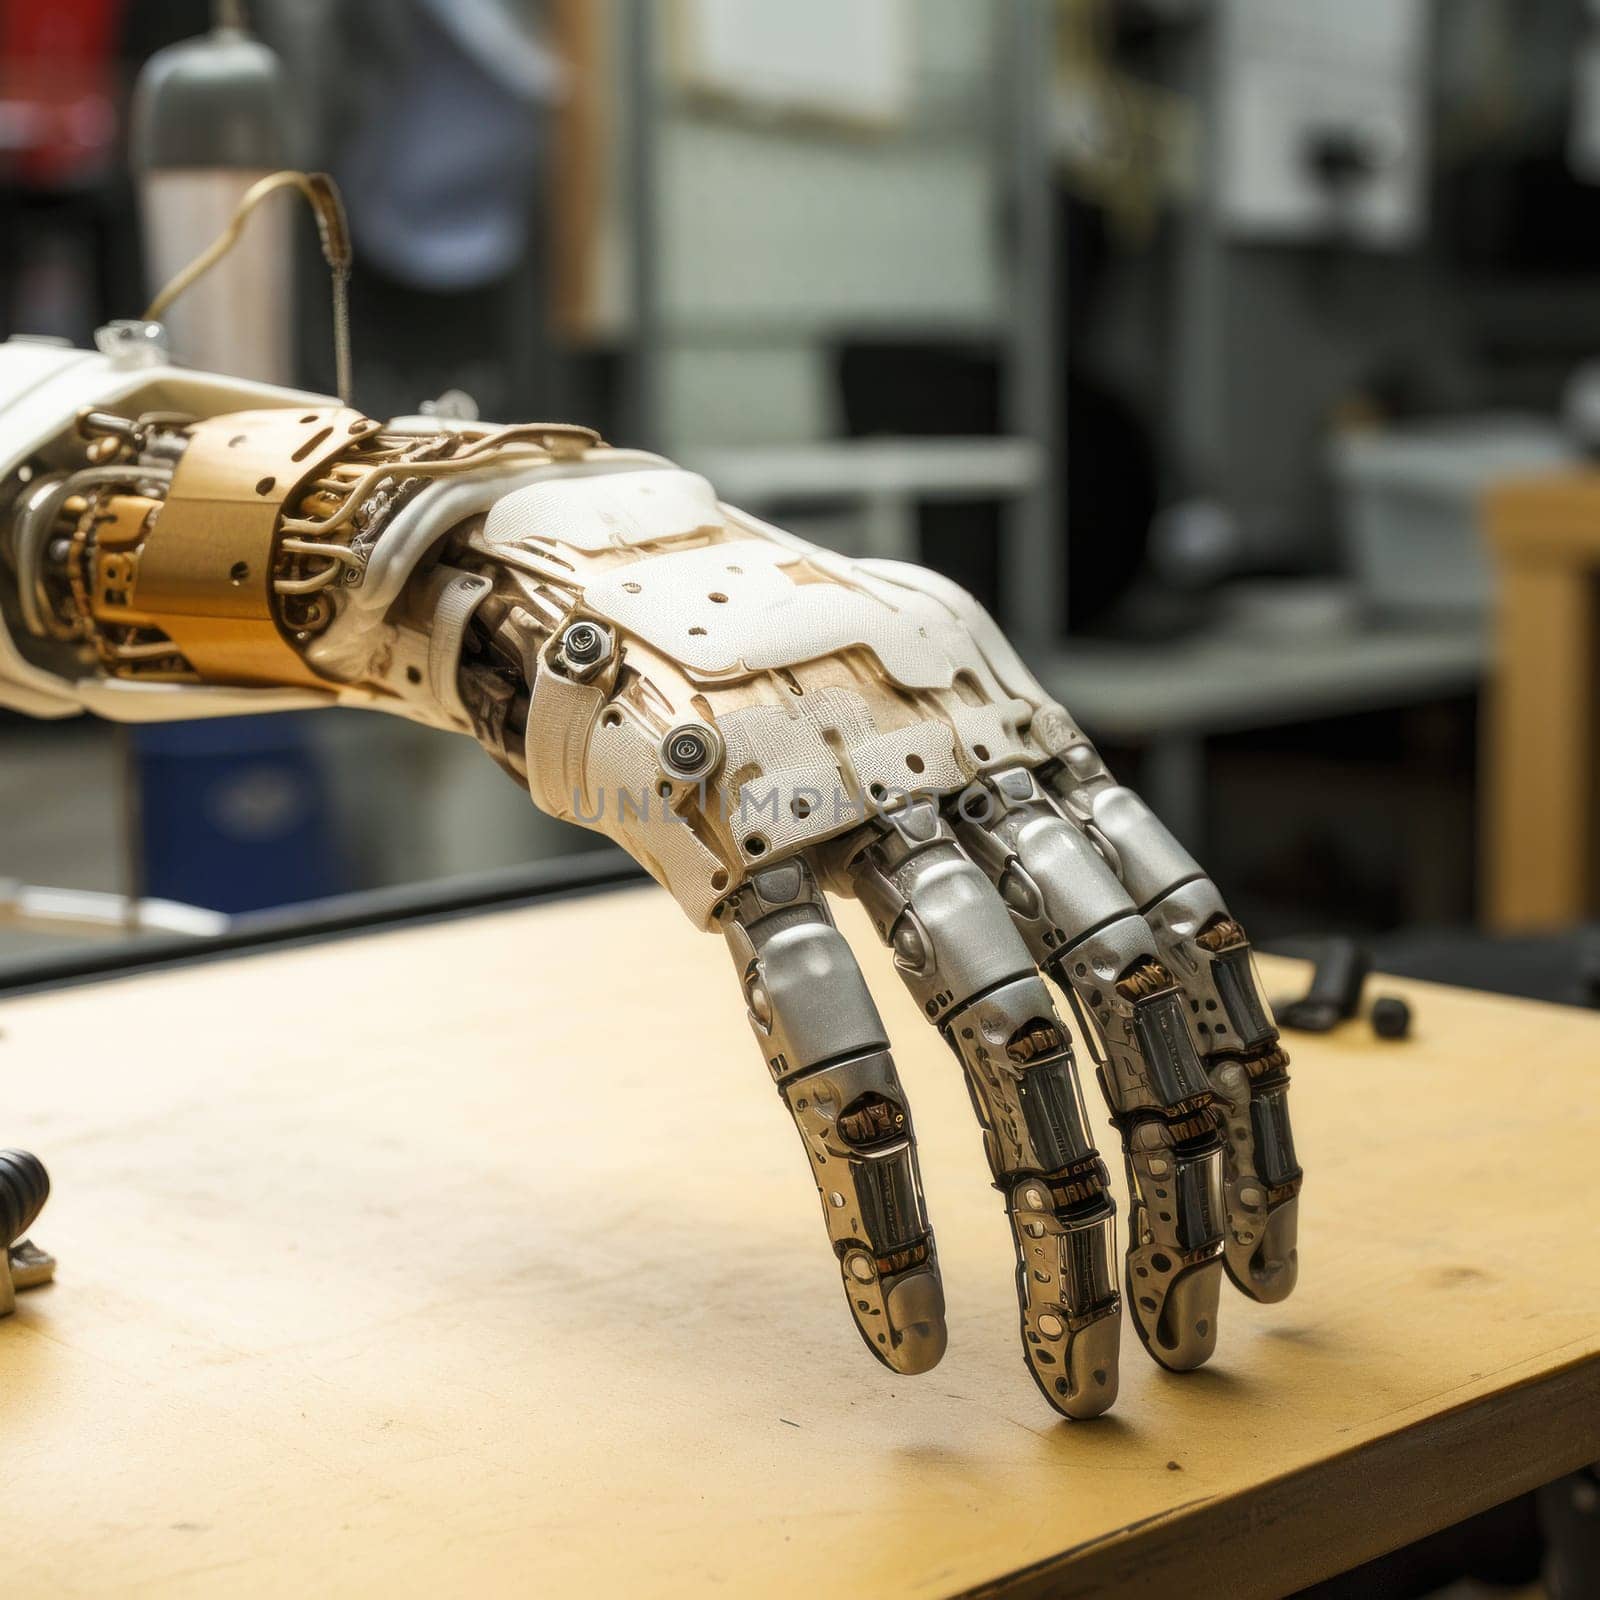 A breathtaking close-up of a robot's mechanical hand, symbolizing the unparalleled capabilities of technology.